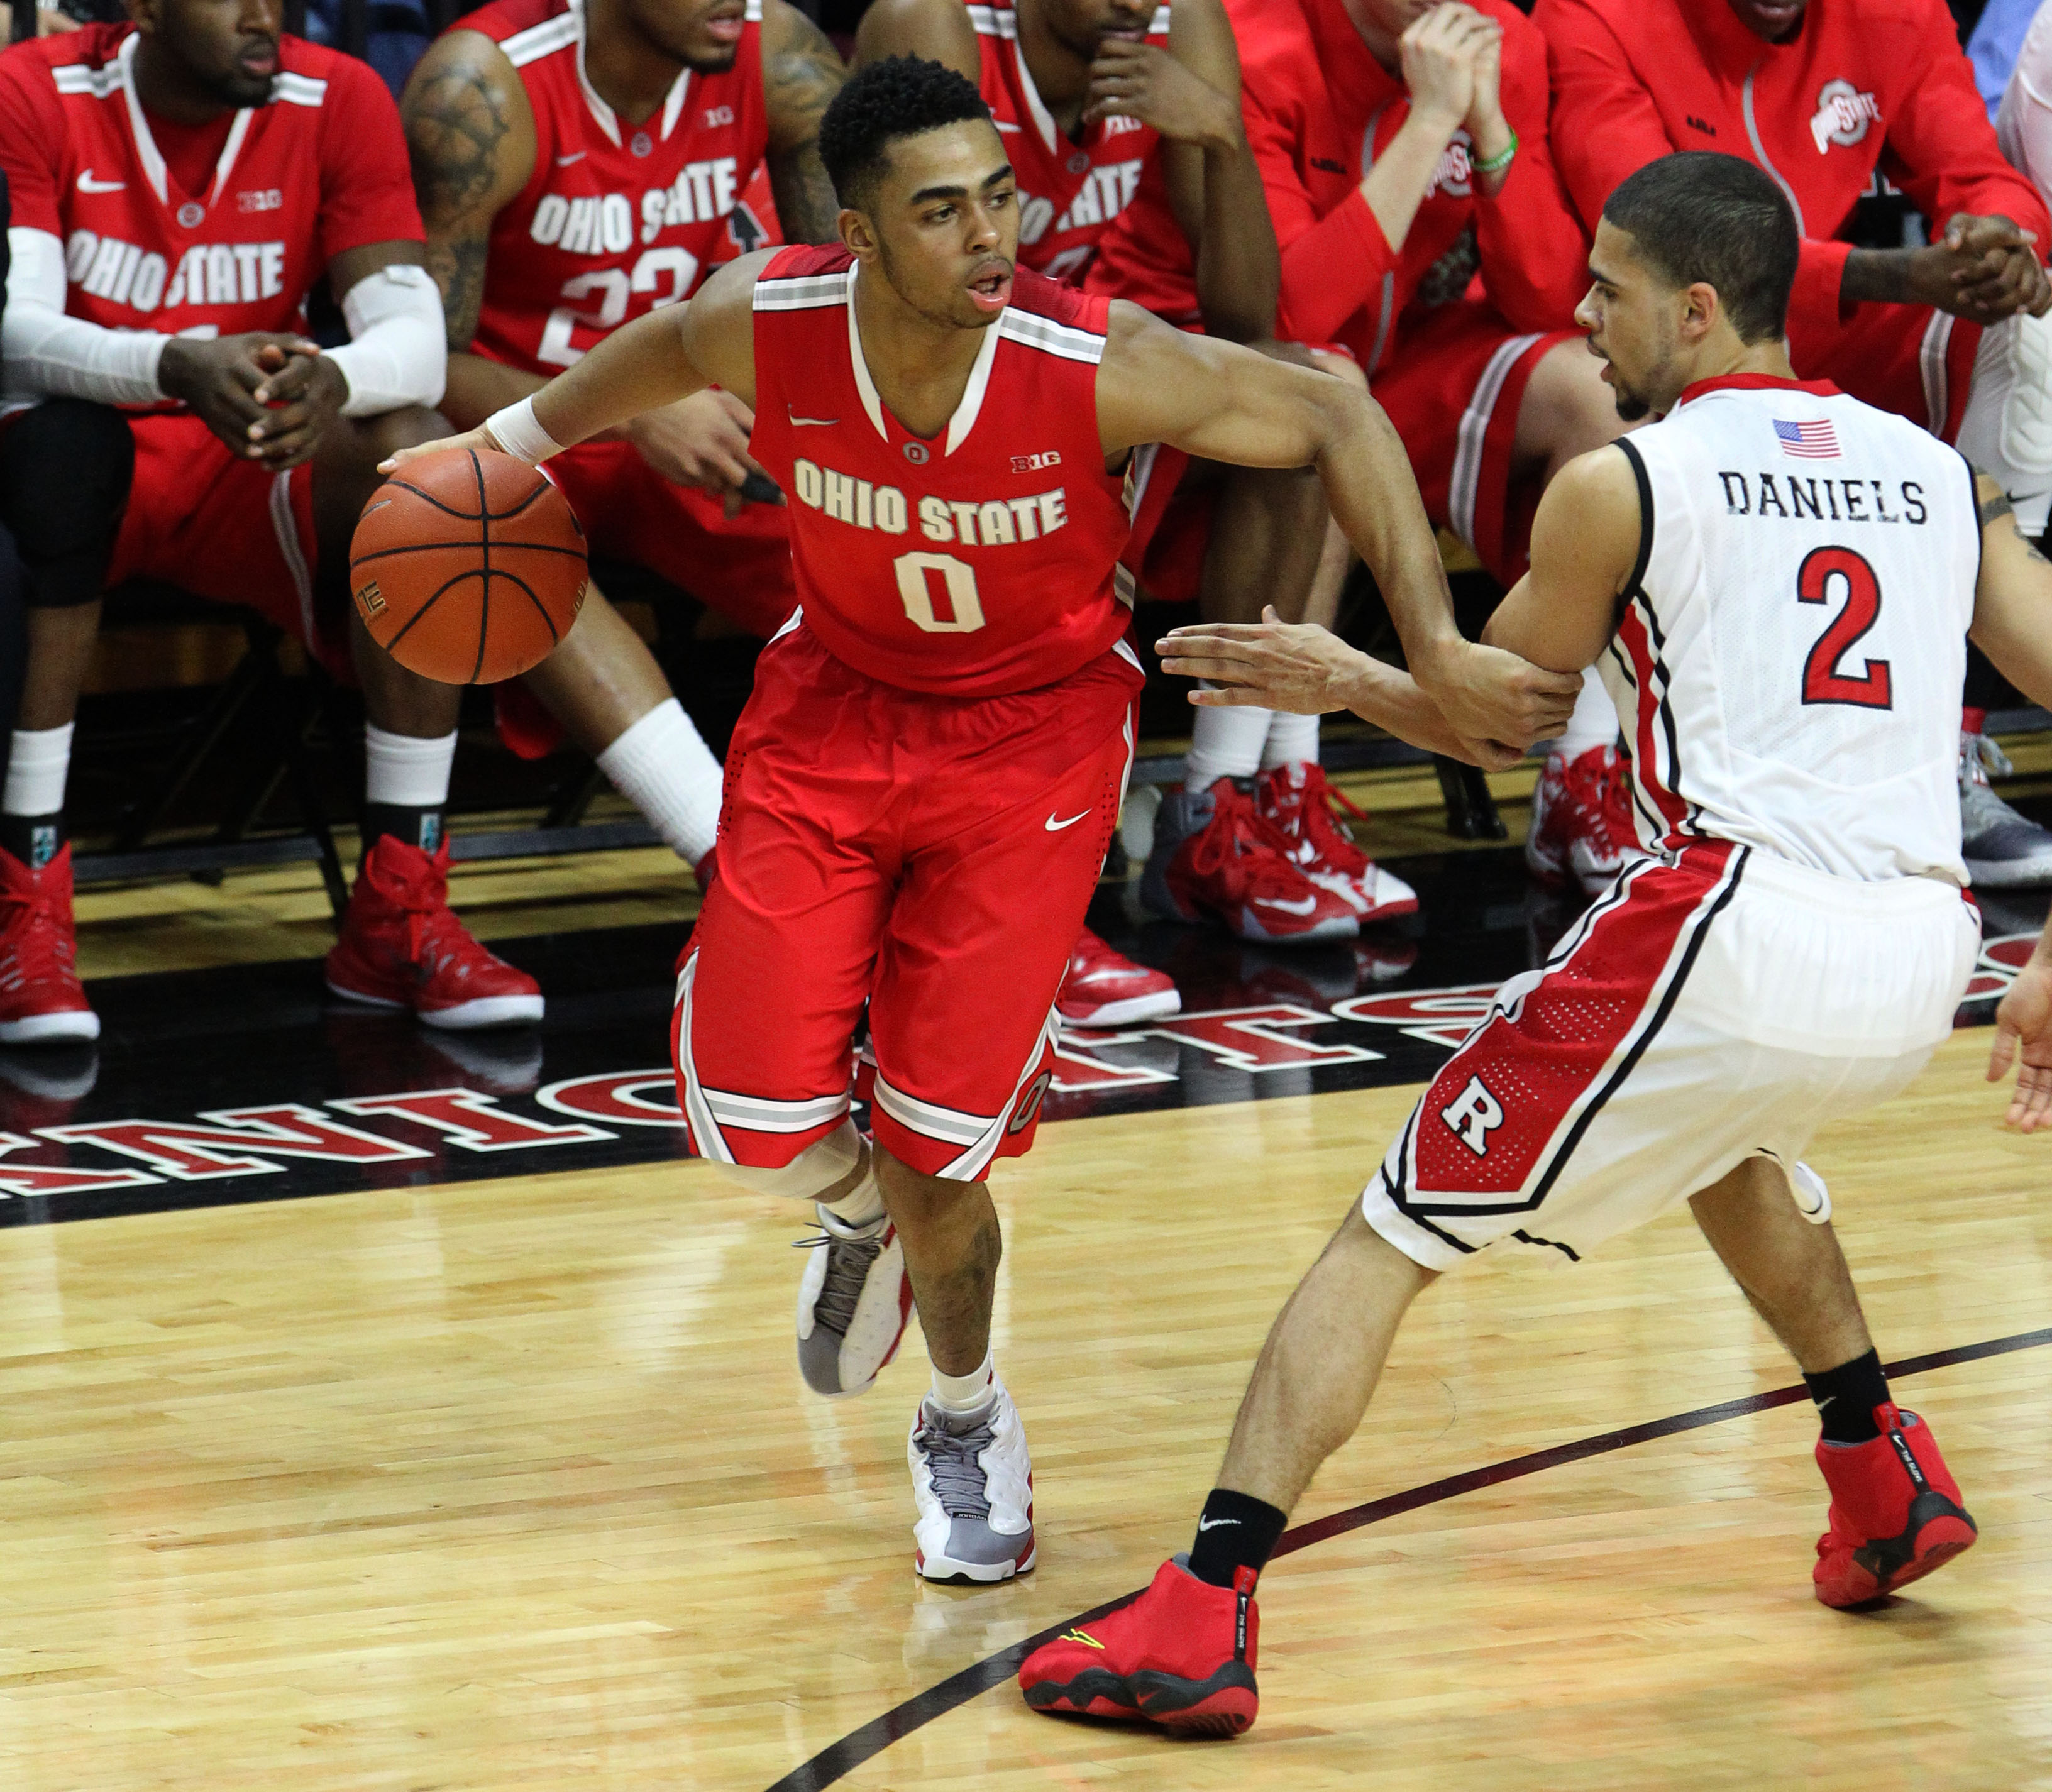 Feb 8, 2015; Piscataway, NJ, USA; Rutgers Scarlet Knights guard Bishop Daniels (2) defends against Ohio State Buckeyes guard D'Angelo Russell (0) during second half at Louis Brown Athletic Center. Mandatory Credit: Noah K. Murray-USA TODAY Sports